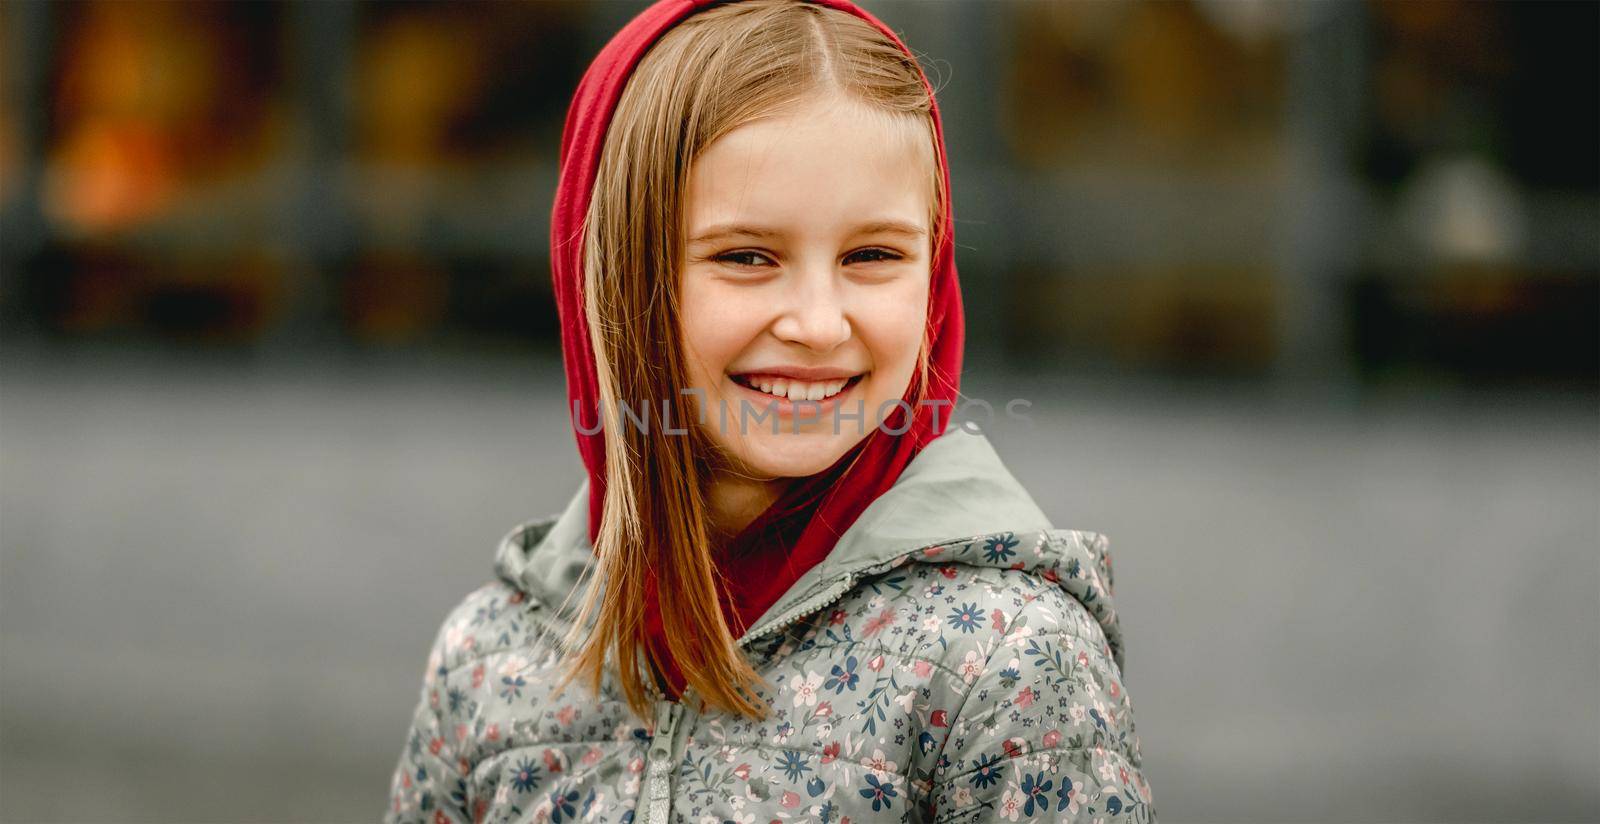 Preteen girl wearing hood and smiling at the street at autumn. Pretty female kid portrait outdoors in fall season